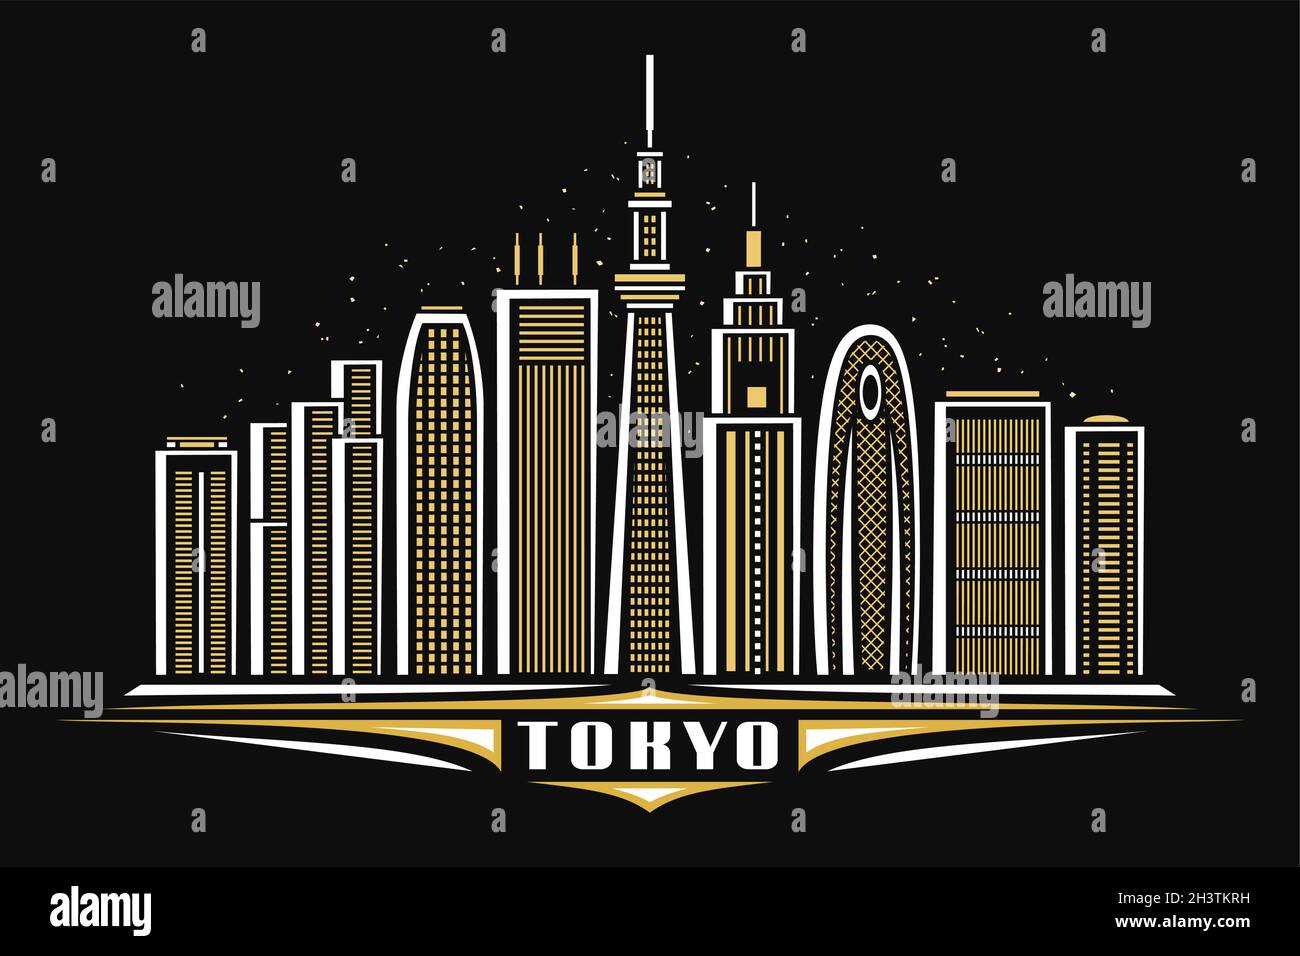 Vector illustration of Tokyo, dark horizontal poster with linear design famous tokyo city scape on dusk starry sky background, asian urban line art co Stock Vector